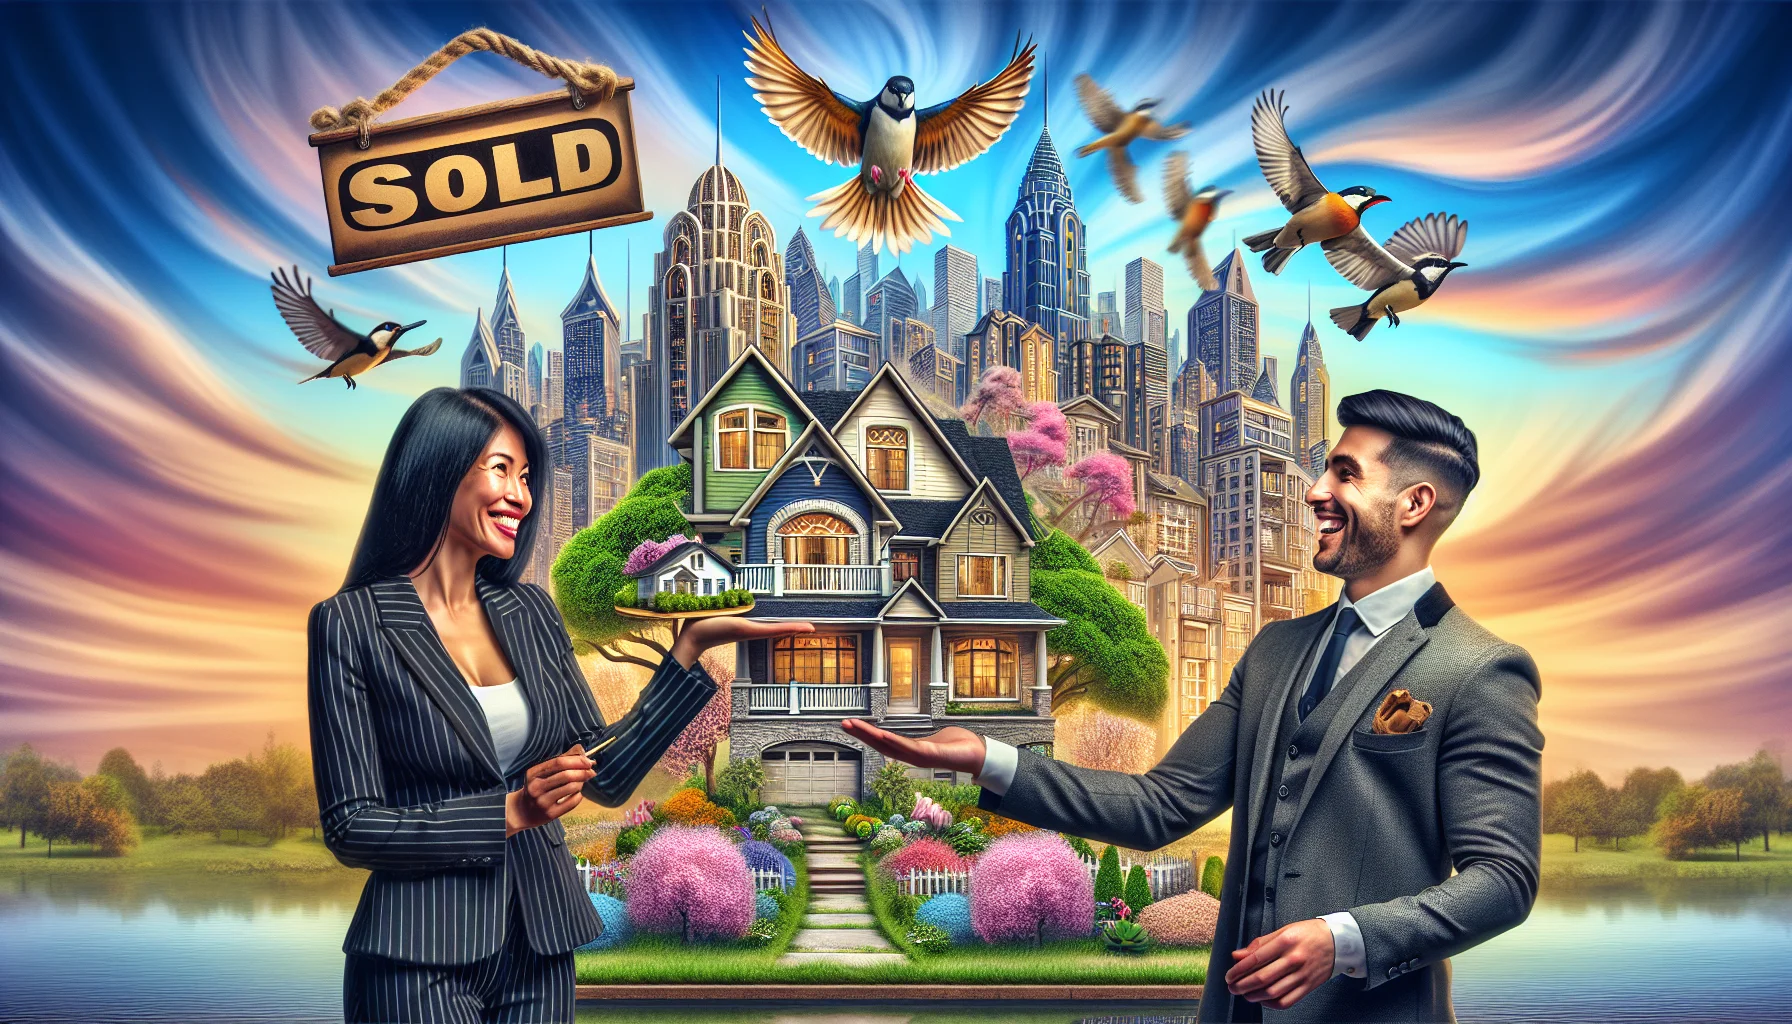 Imagine a whimsical and appeal-filled image reflecting the epitome of an ideal real estate transaction. On one side of the image, place an upbeat South Asian female real estate agent, clad in professional attire, smiling as she holds up a model of a beautiful house with an elaborately manicured garden. On the other side of the picture, there's a Hispanic male client, beaming with joy as he gleefully shakes hands with the agent, having just secured his dream home. The background is a vibrant cityscape showing diverse architectural styles, embodying the thriving real estate market. Add touches of humor, such as birds lifting the 'Sold' sign, to bring a lighthearted touch to the scene.